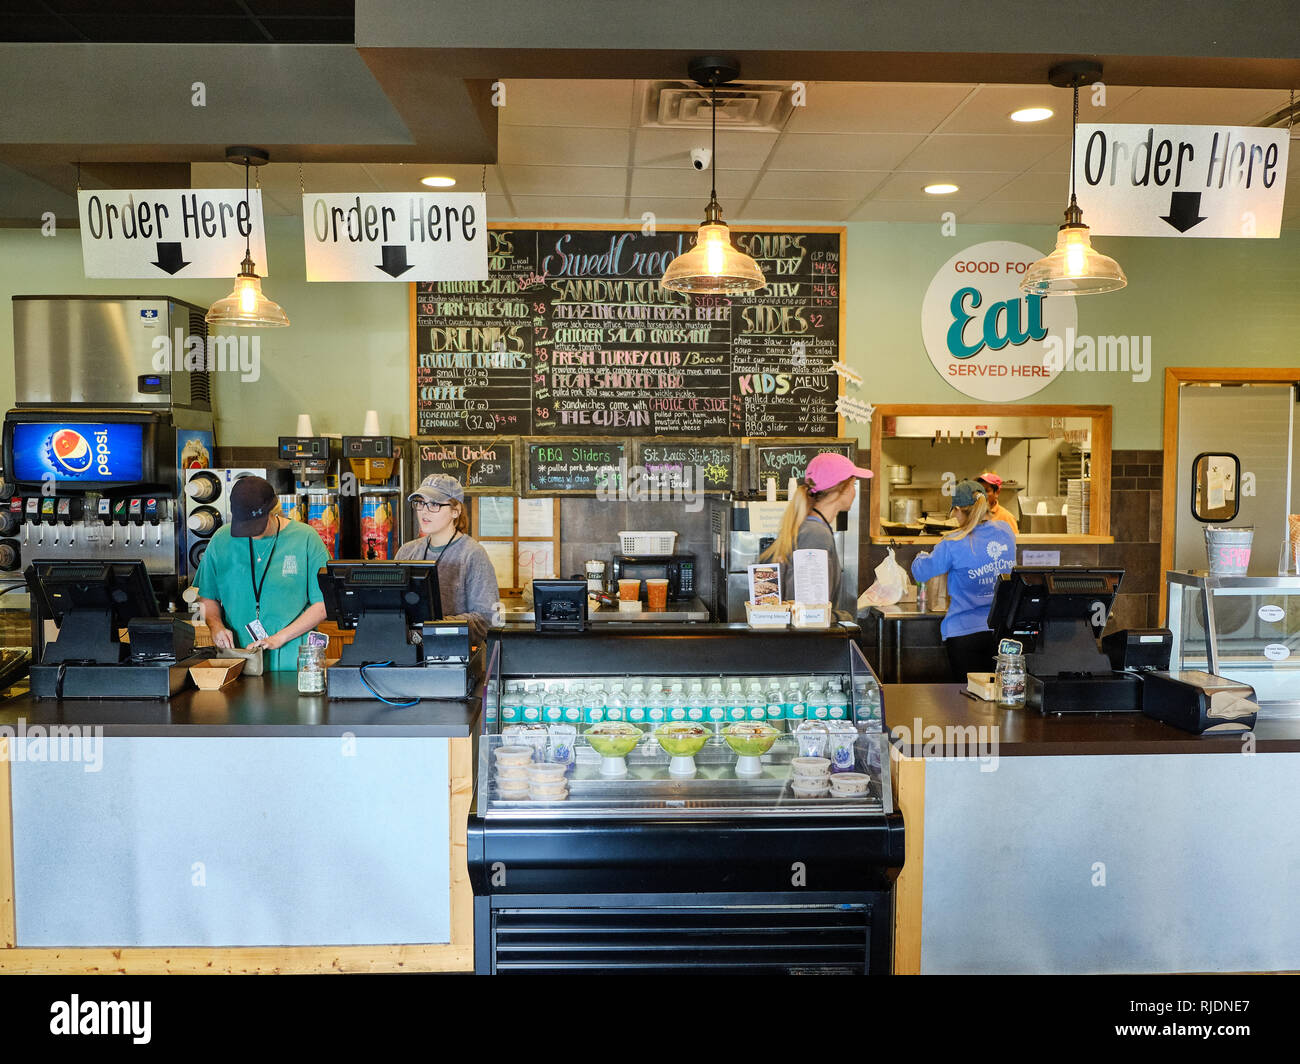 Deli cafe or restaurant front order counter with female employees working behind the counter at Sweet Creek Farm Market in Pike Road Alabama, USA. Stock Photo